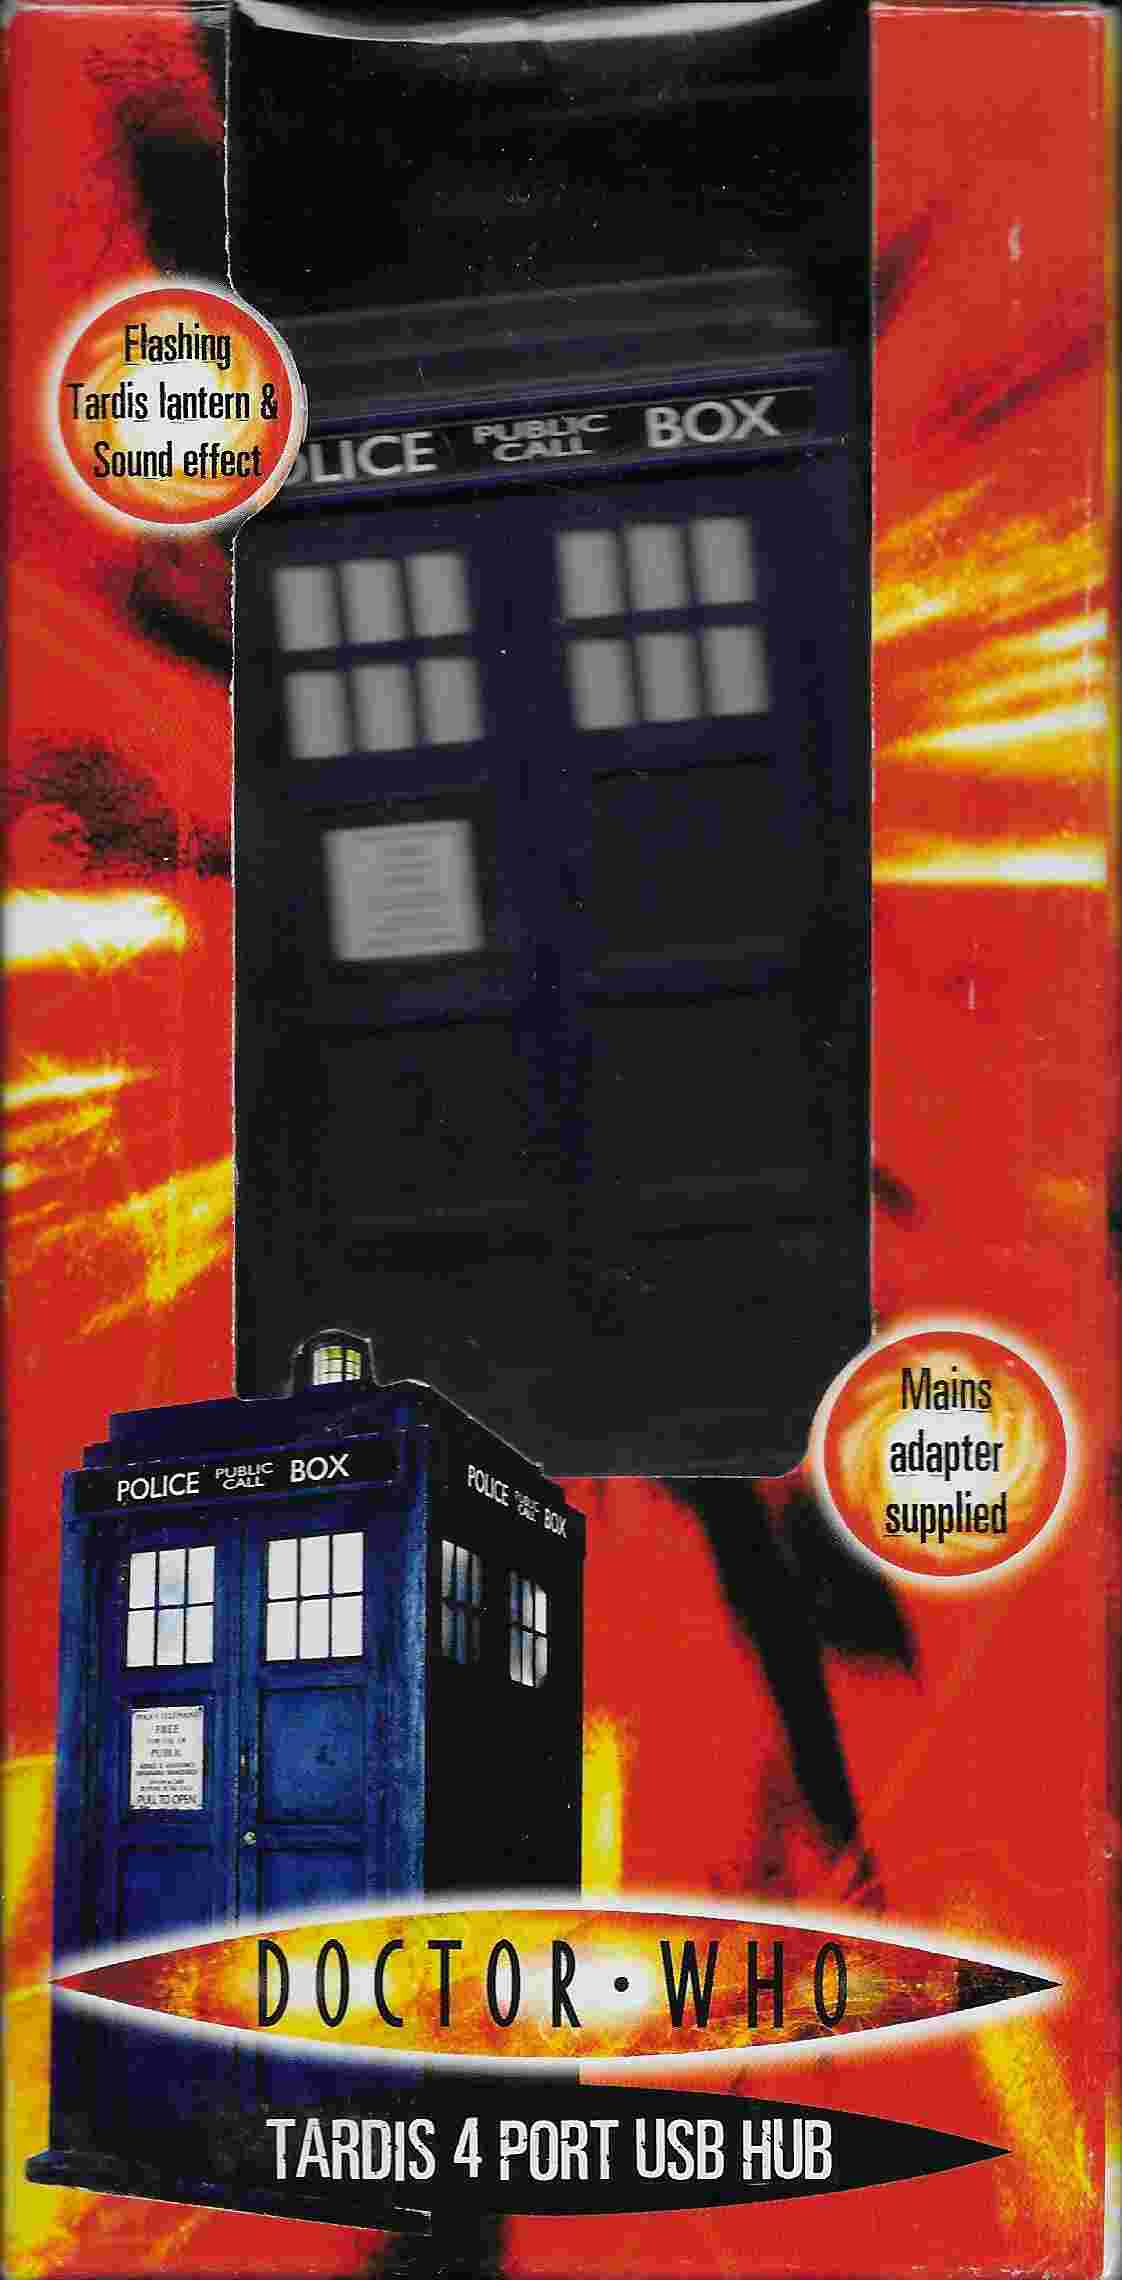 Picture of DW-USB Doctor Who - TARDIS USB by artist Unknown from the BBC records and Tapes library